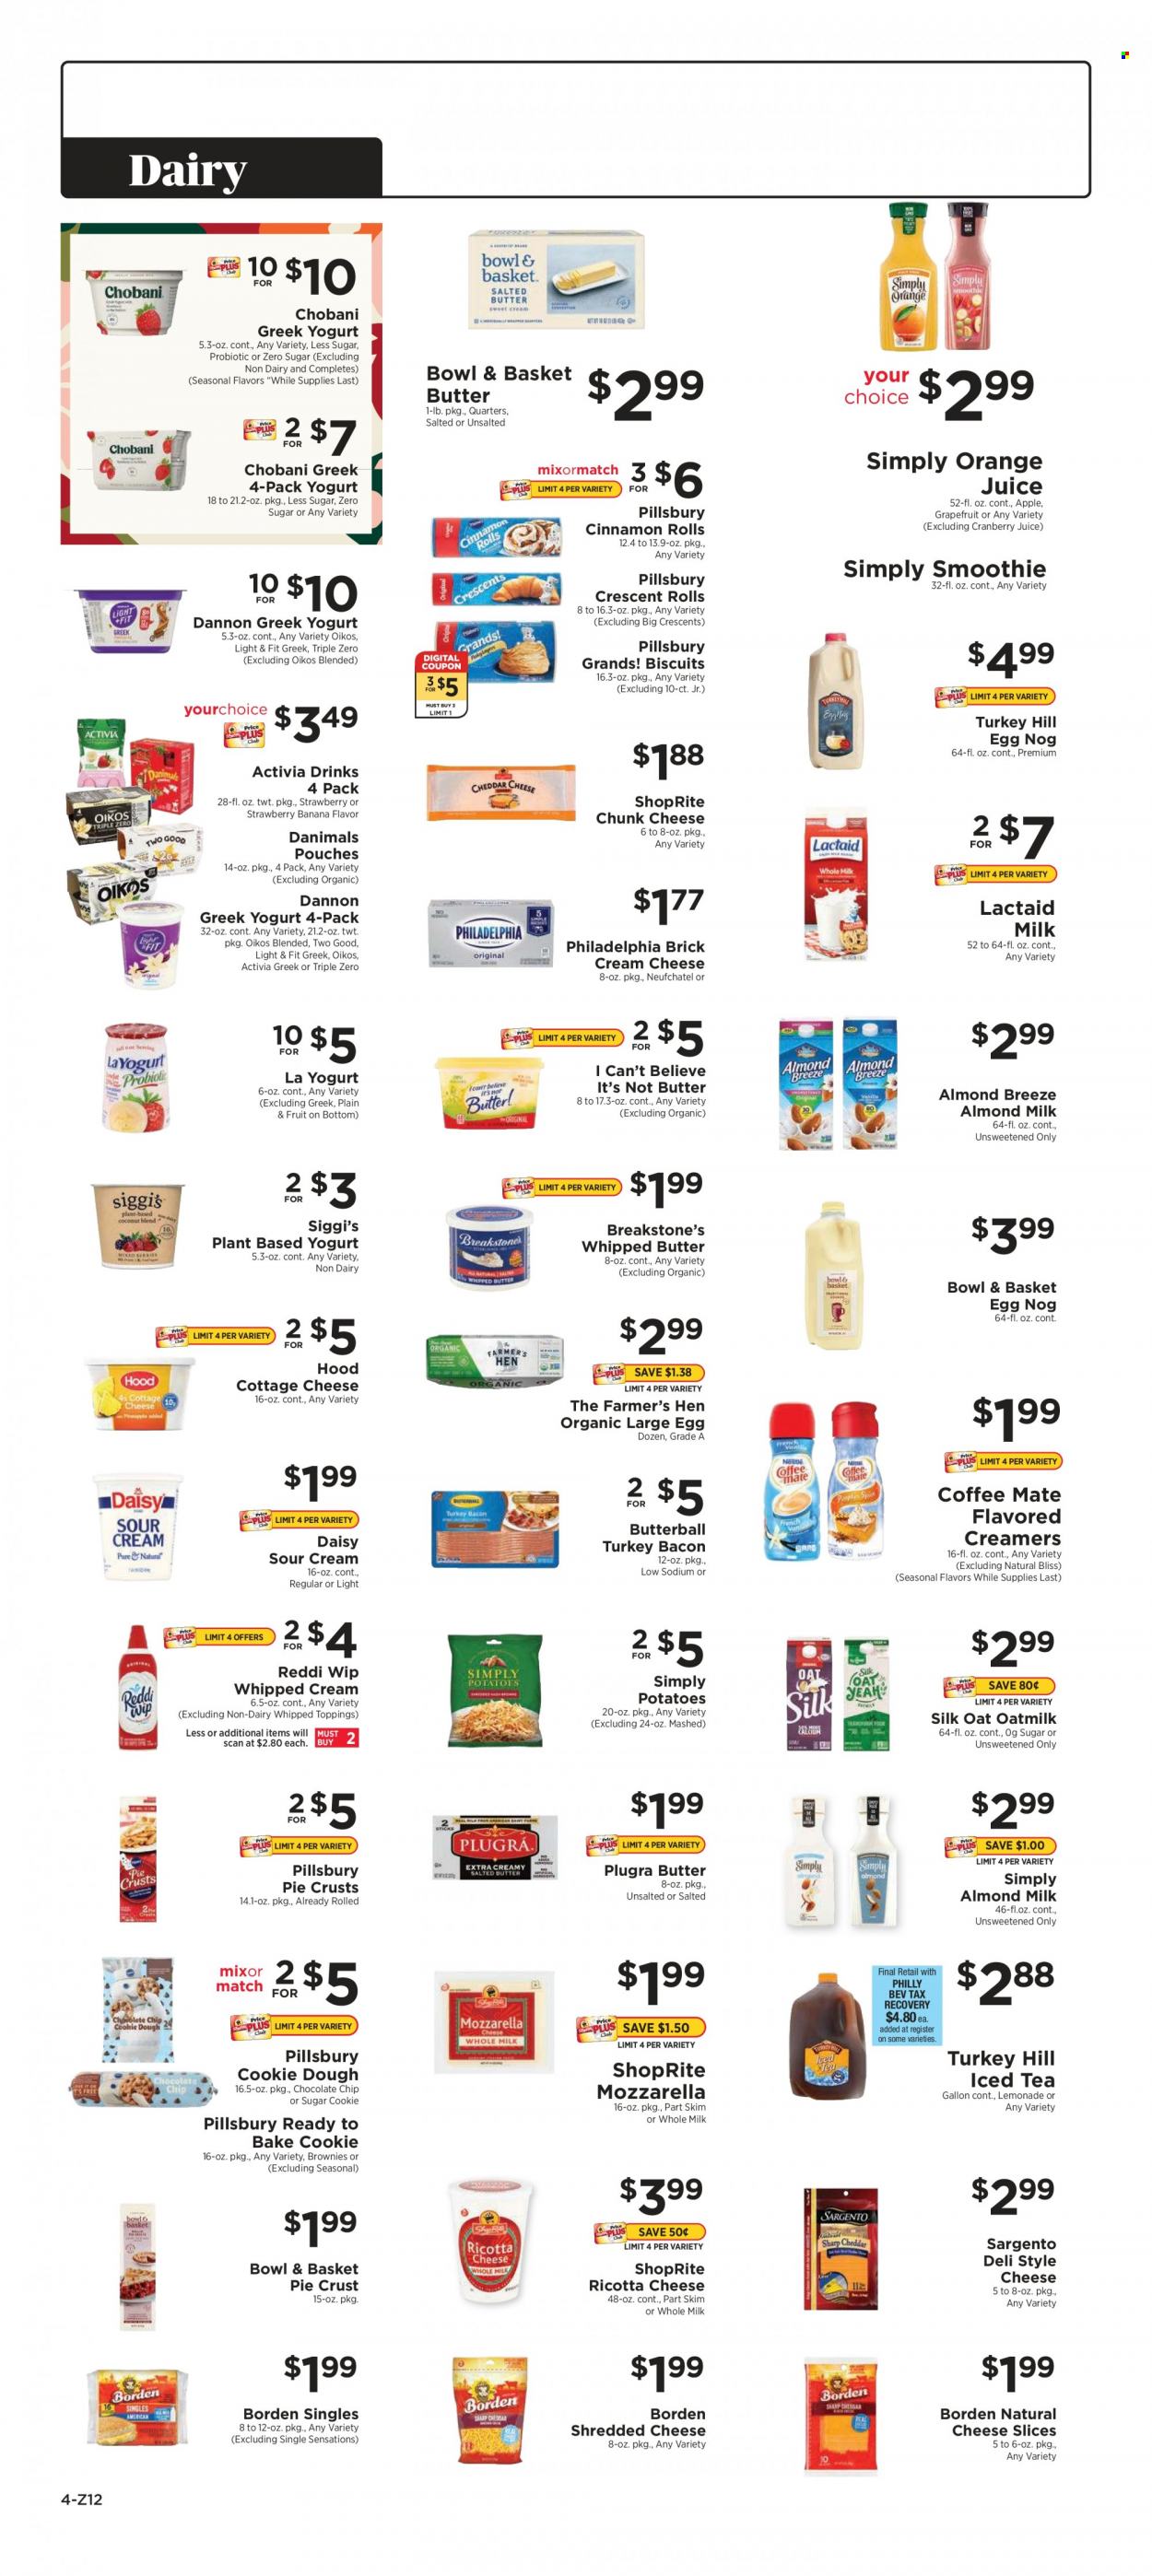 thumbnail - ShopRite Flyer - 11/21/2021 - 11/27/2021 - Sales products - Bowl & Basket, cinnamon roll, crescent rolls, brownies, potatoes, grapefruits, Pillsbury, bacon, Butterball, turkey bacon, cottage cheese, cream cheese, Lactaid, mozzarella, Neufchâtel, ricotta, shredded cheese, sliced cheese, Philadelphia, chunk cheese, Sargento, greek yoghurt, yoghurt, Activia, Oikos, Chobani, Dannon, Danimals, almond milk, Silk, Almond Breeze, oat milk, eggs, whipped butter, I Can't Believe It's Not Butter, sour cream, whipped cream, cookie dough, chocolate chips, biscuit, pie crust, cranberry juice, lemonade, orange juice, juice, ice tea, smoothie. Page 4.